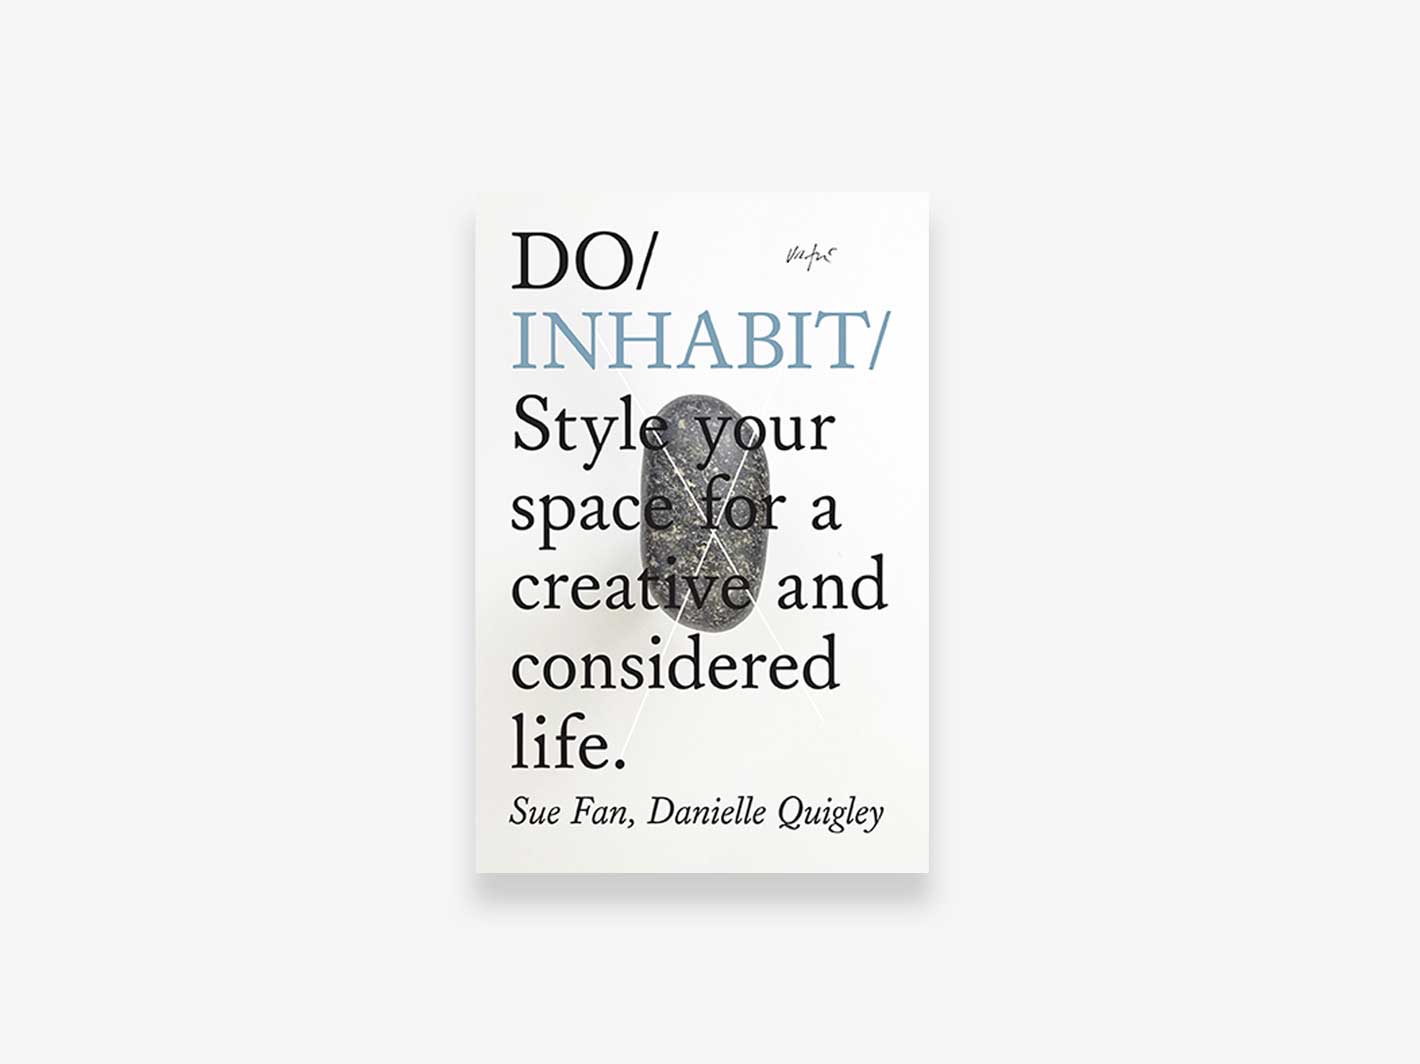 Do Inhabit by Danielle Quigley and Sue Fan